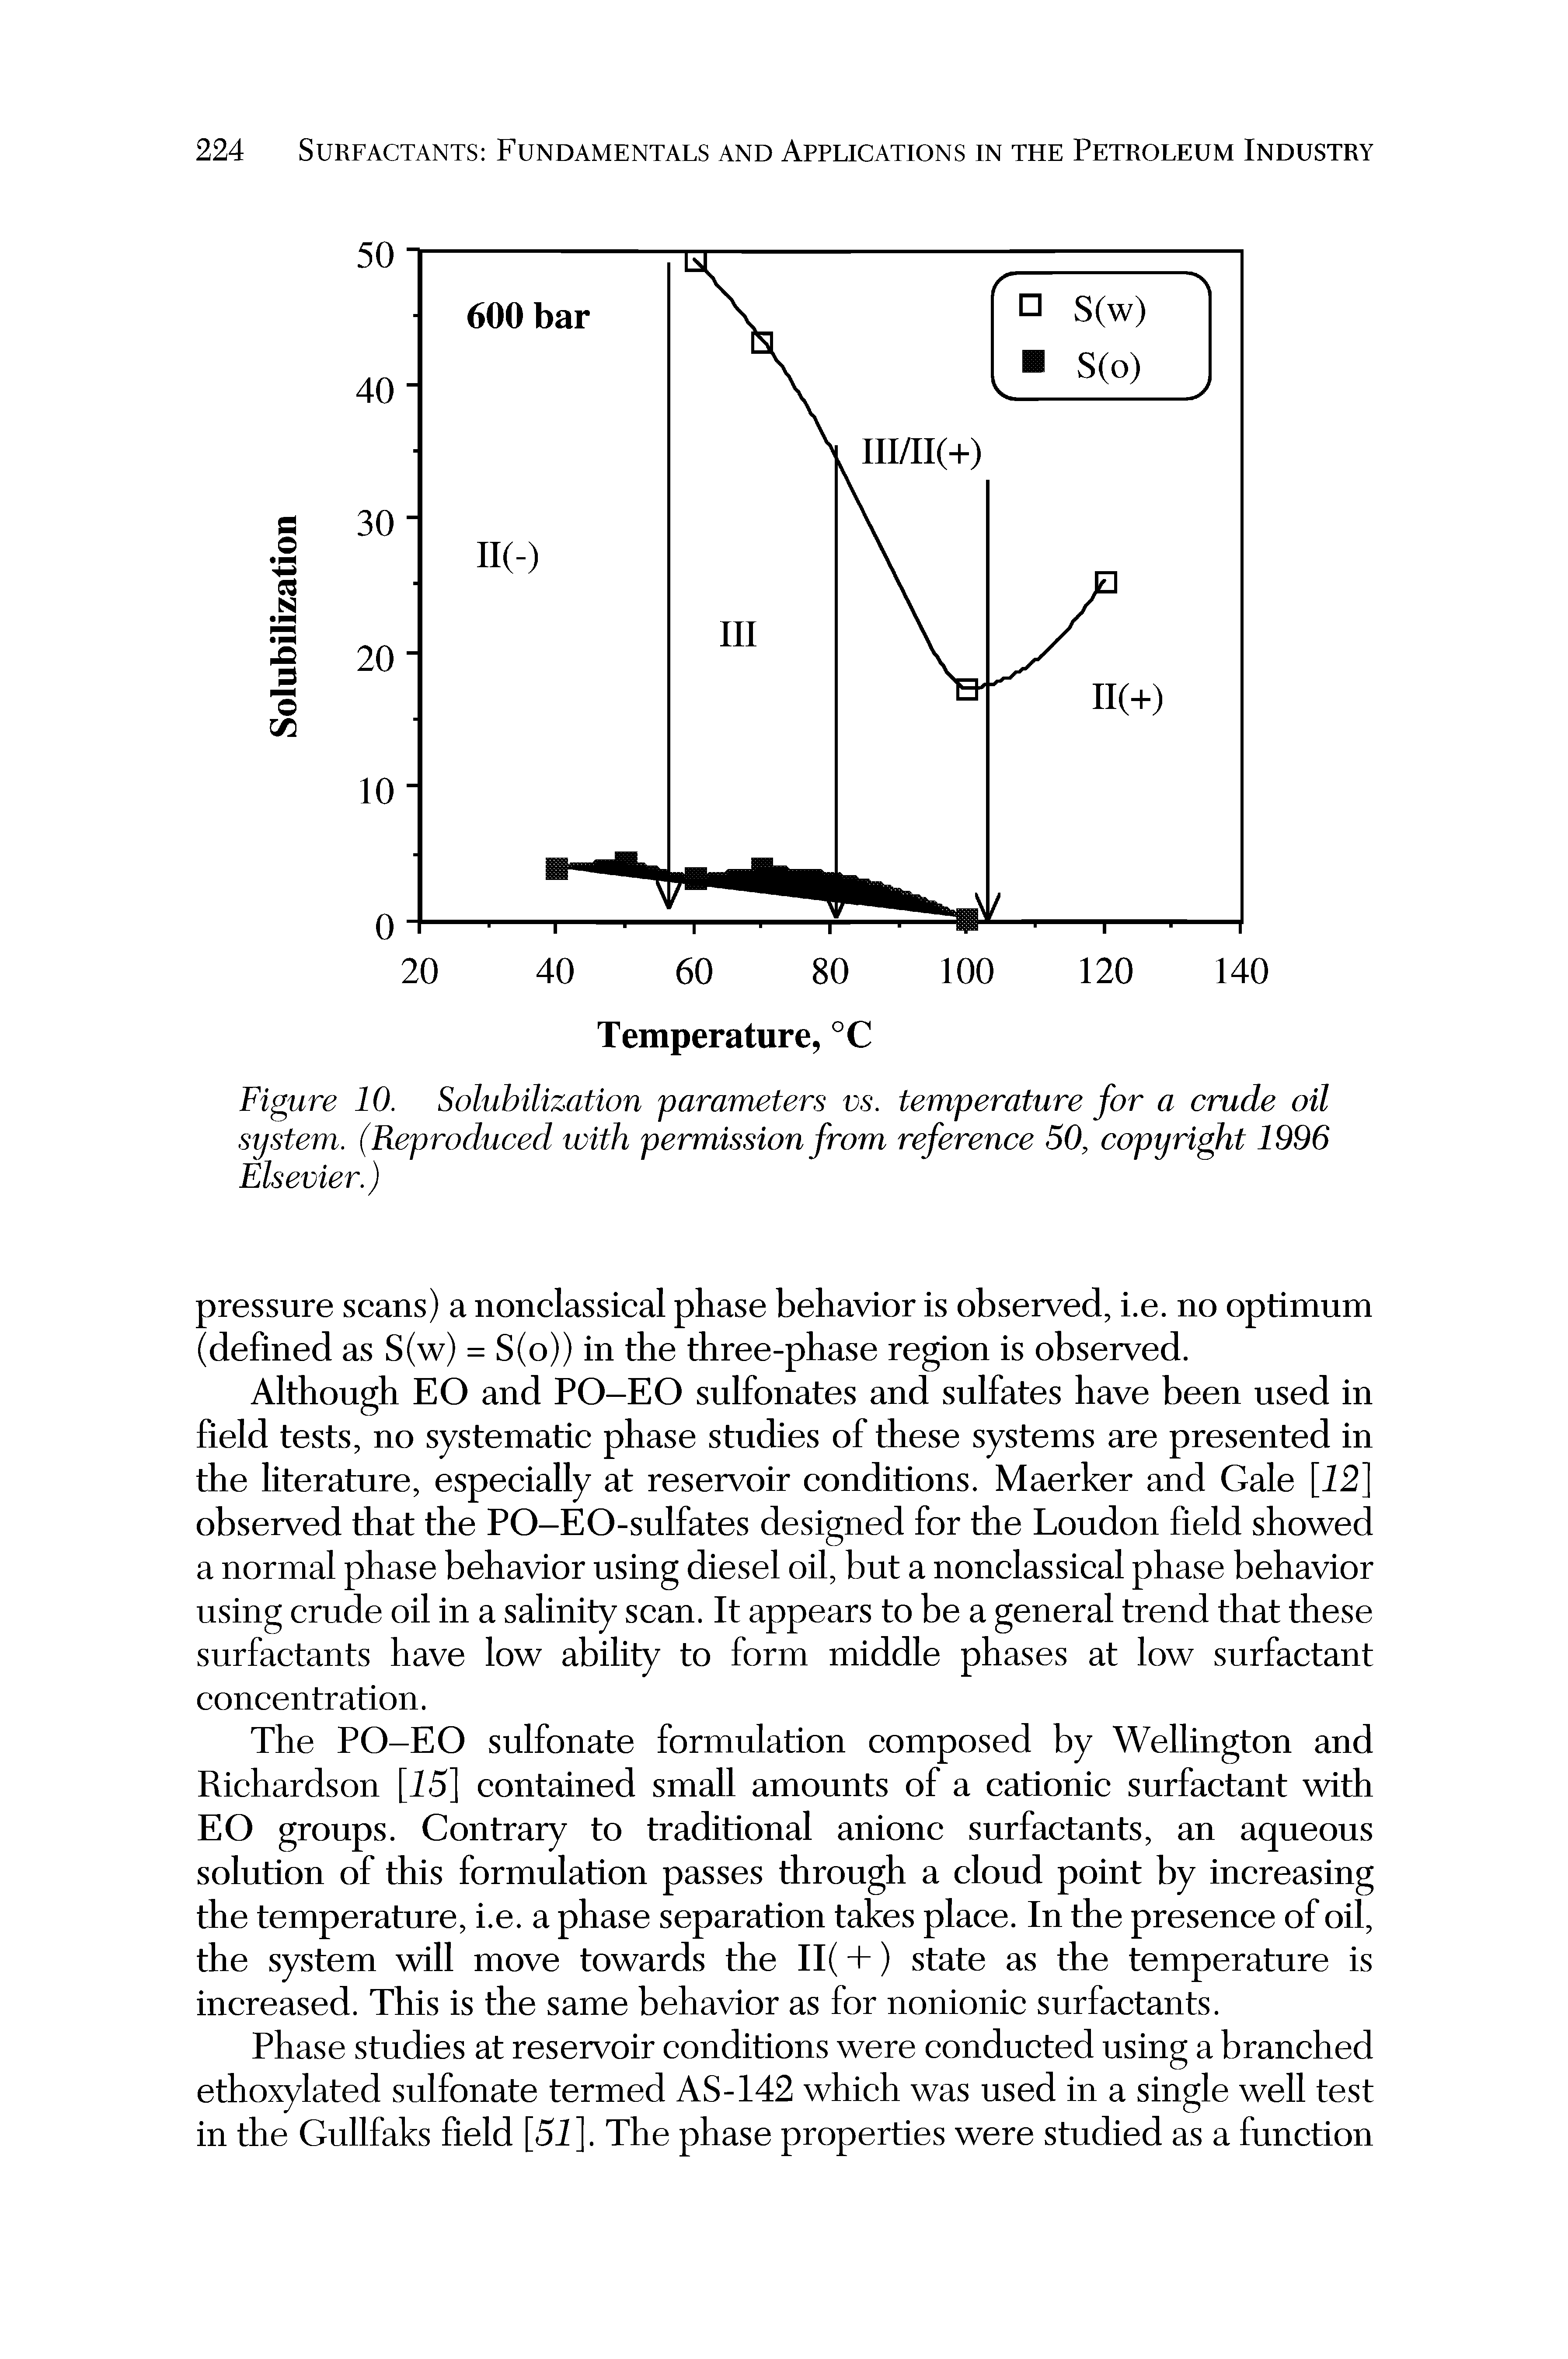 Figure 10. Solubilization parameters vs. temperature for a crude oil system. (Reproduced with permission from reference 50, copyright 1996 Elsevier.)...